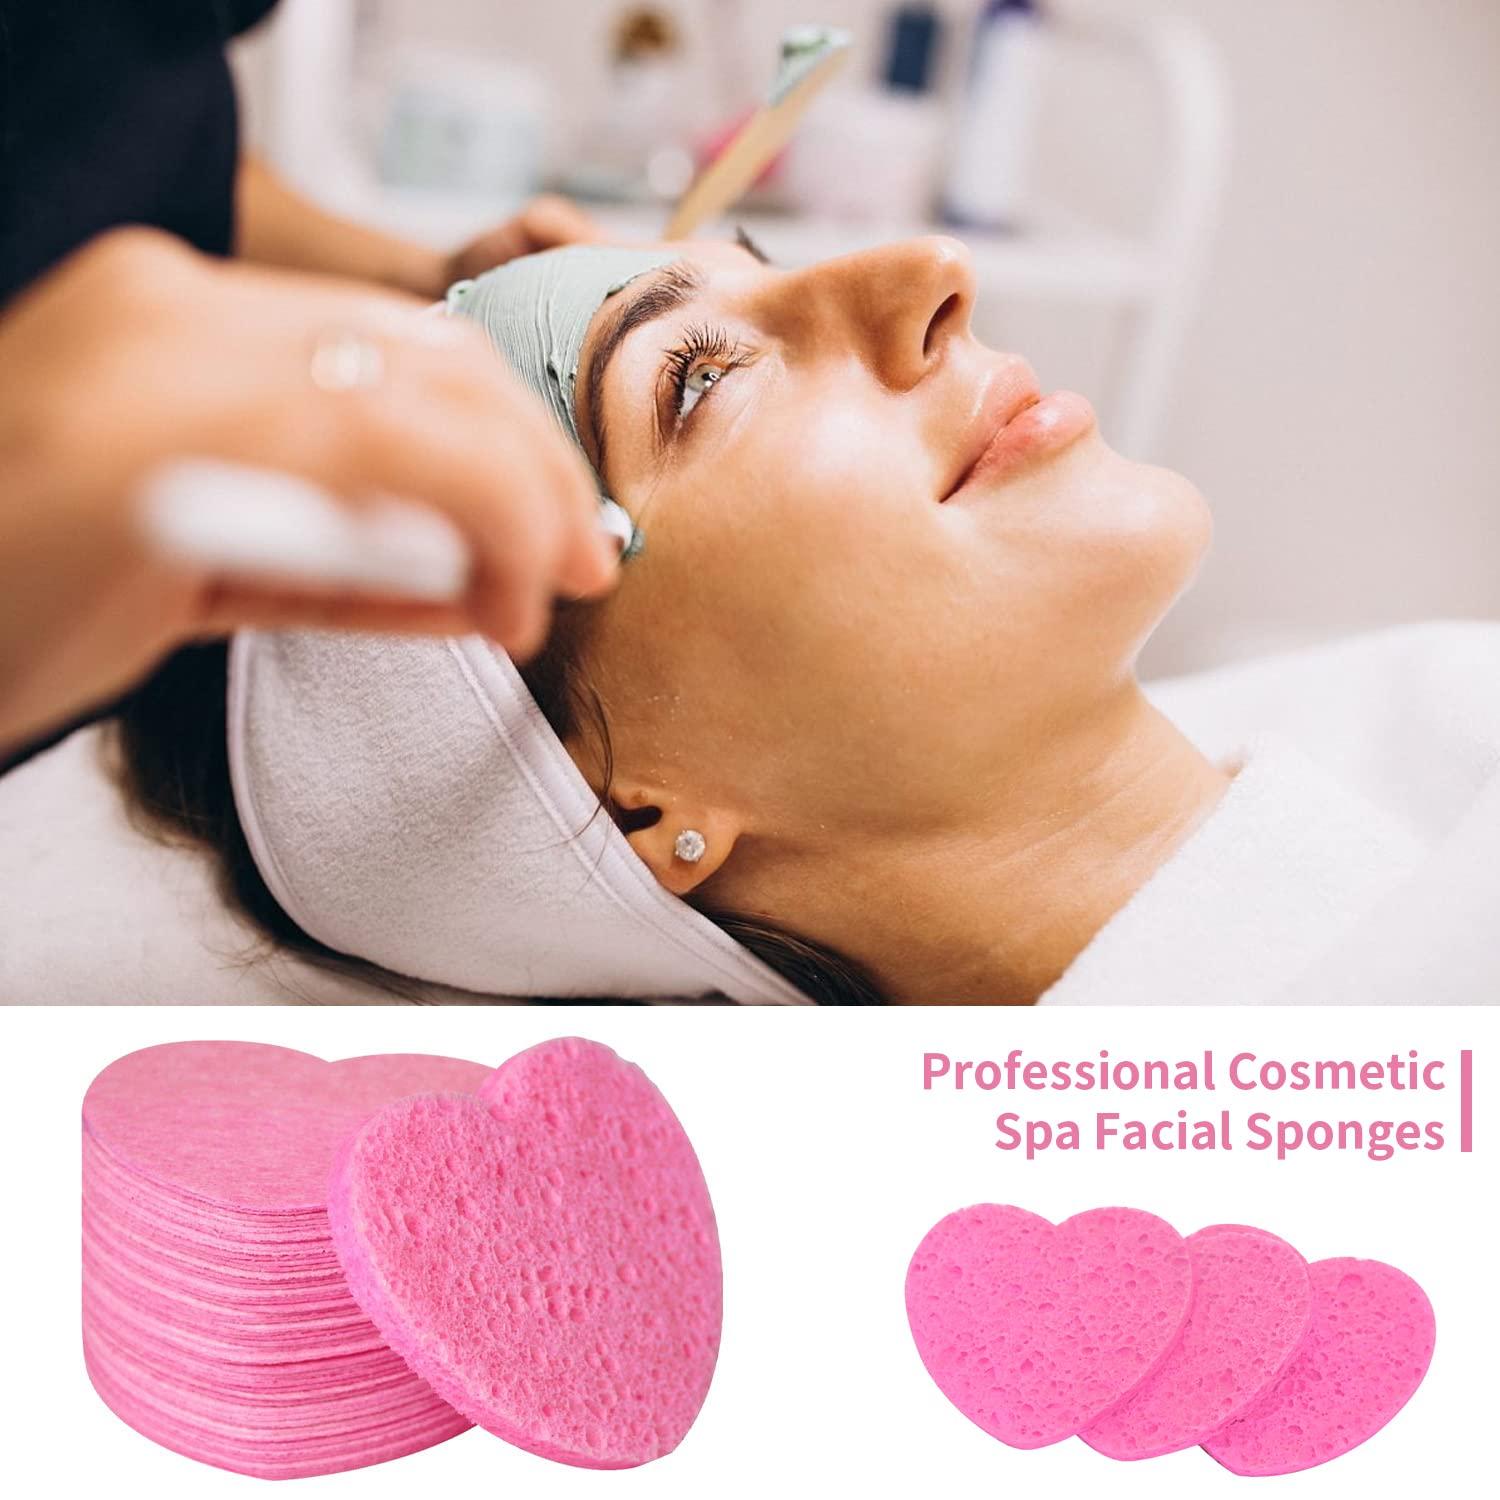 300 Pieces Compressed Facial Sponges with Containers Pink Heart Shape  Makeup Sponges Reusable Exfoliating Sponge Cosmetic Facial Cleansing Pads  for